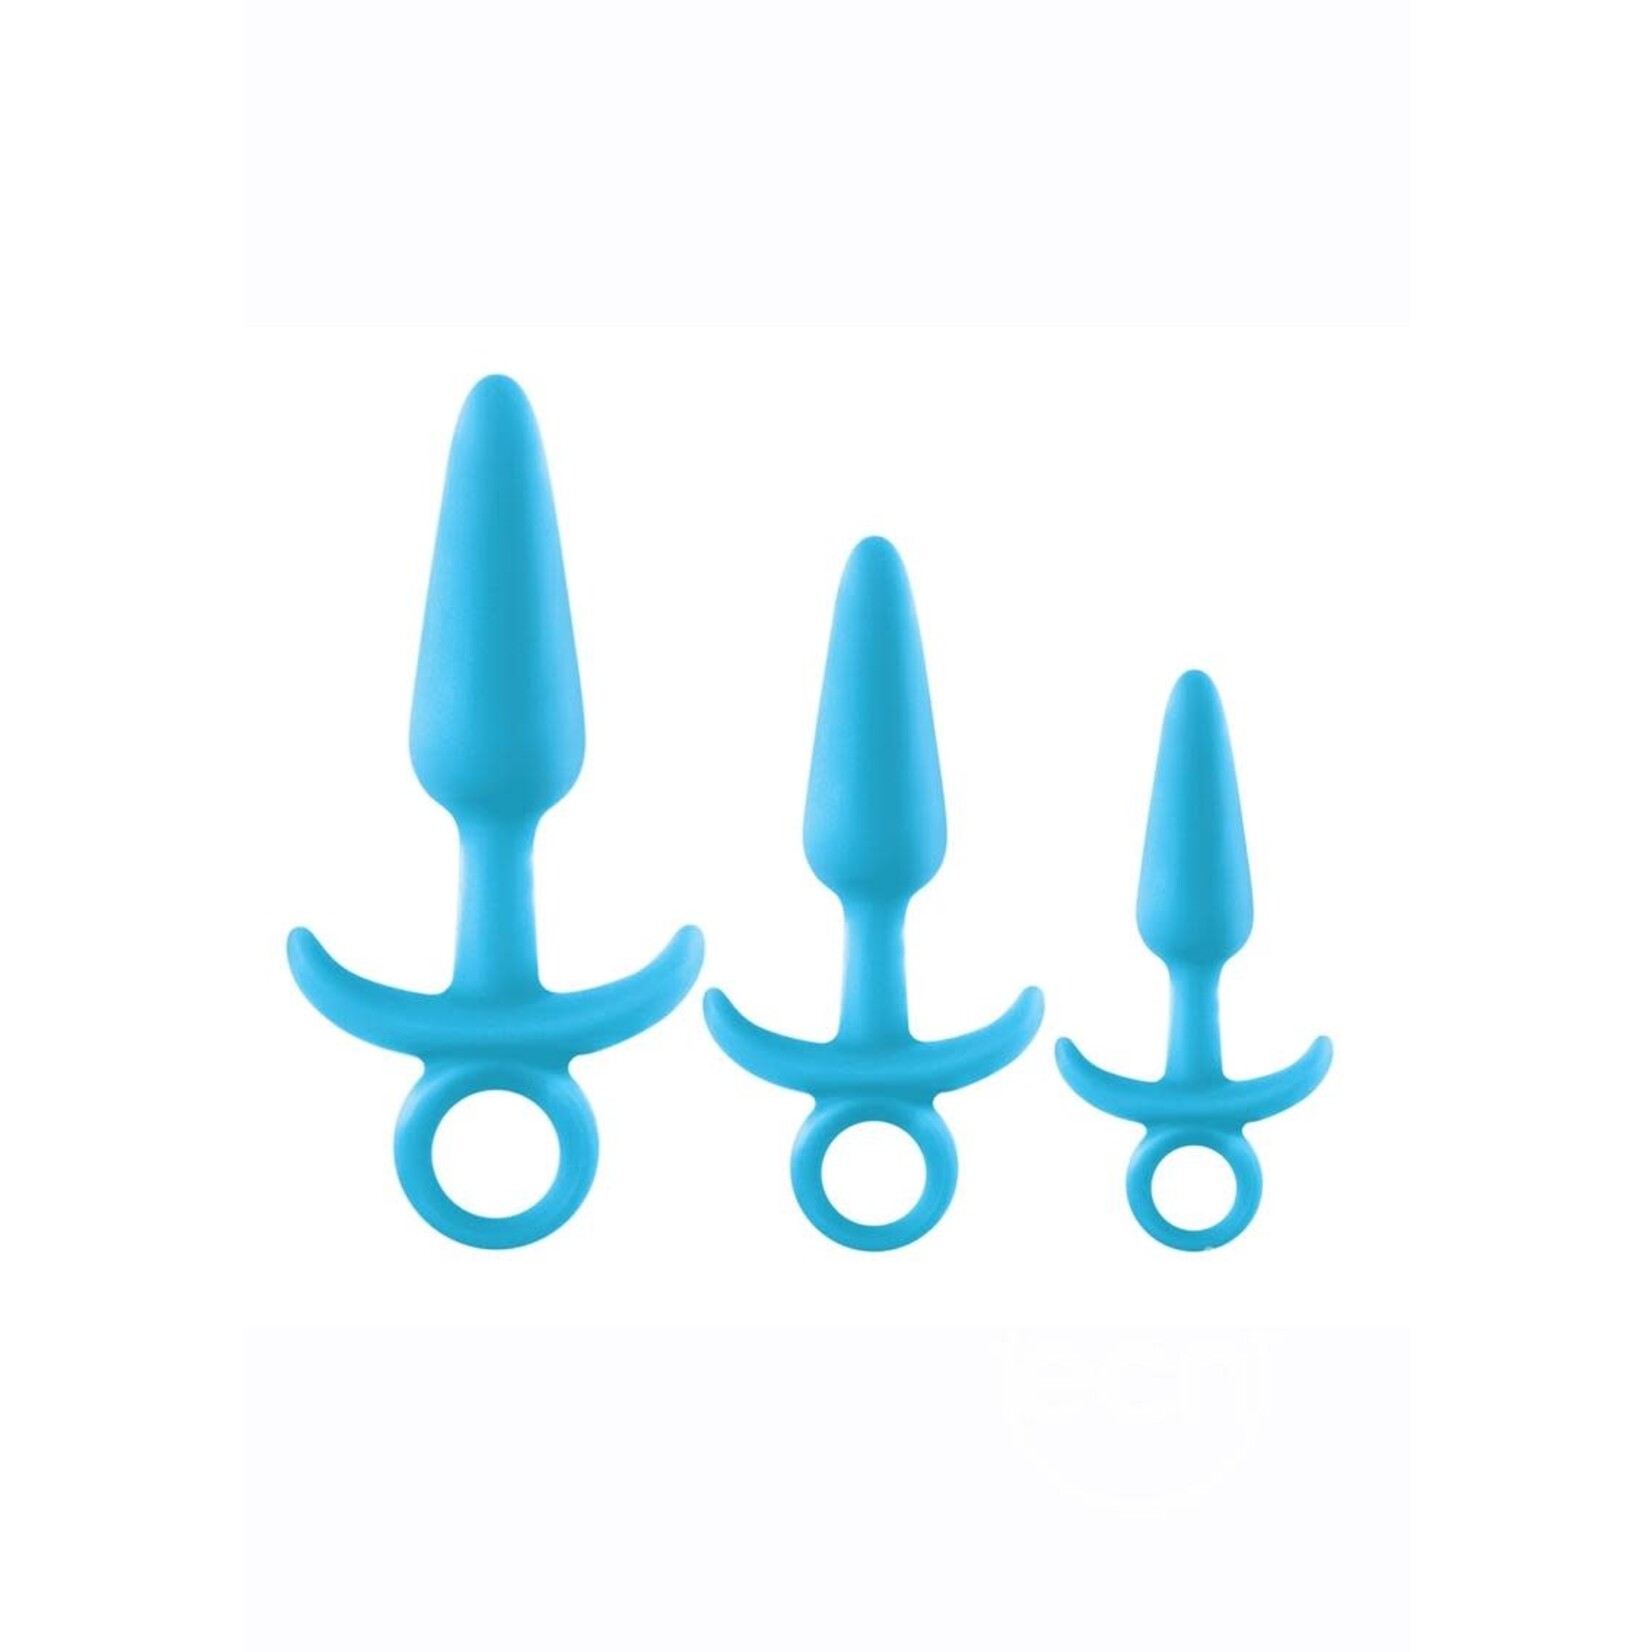 Firefly Prince Trainer Kit Silicone Butt Plugs Glow In The Dark - Blue